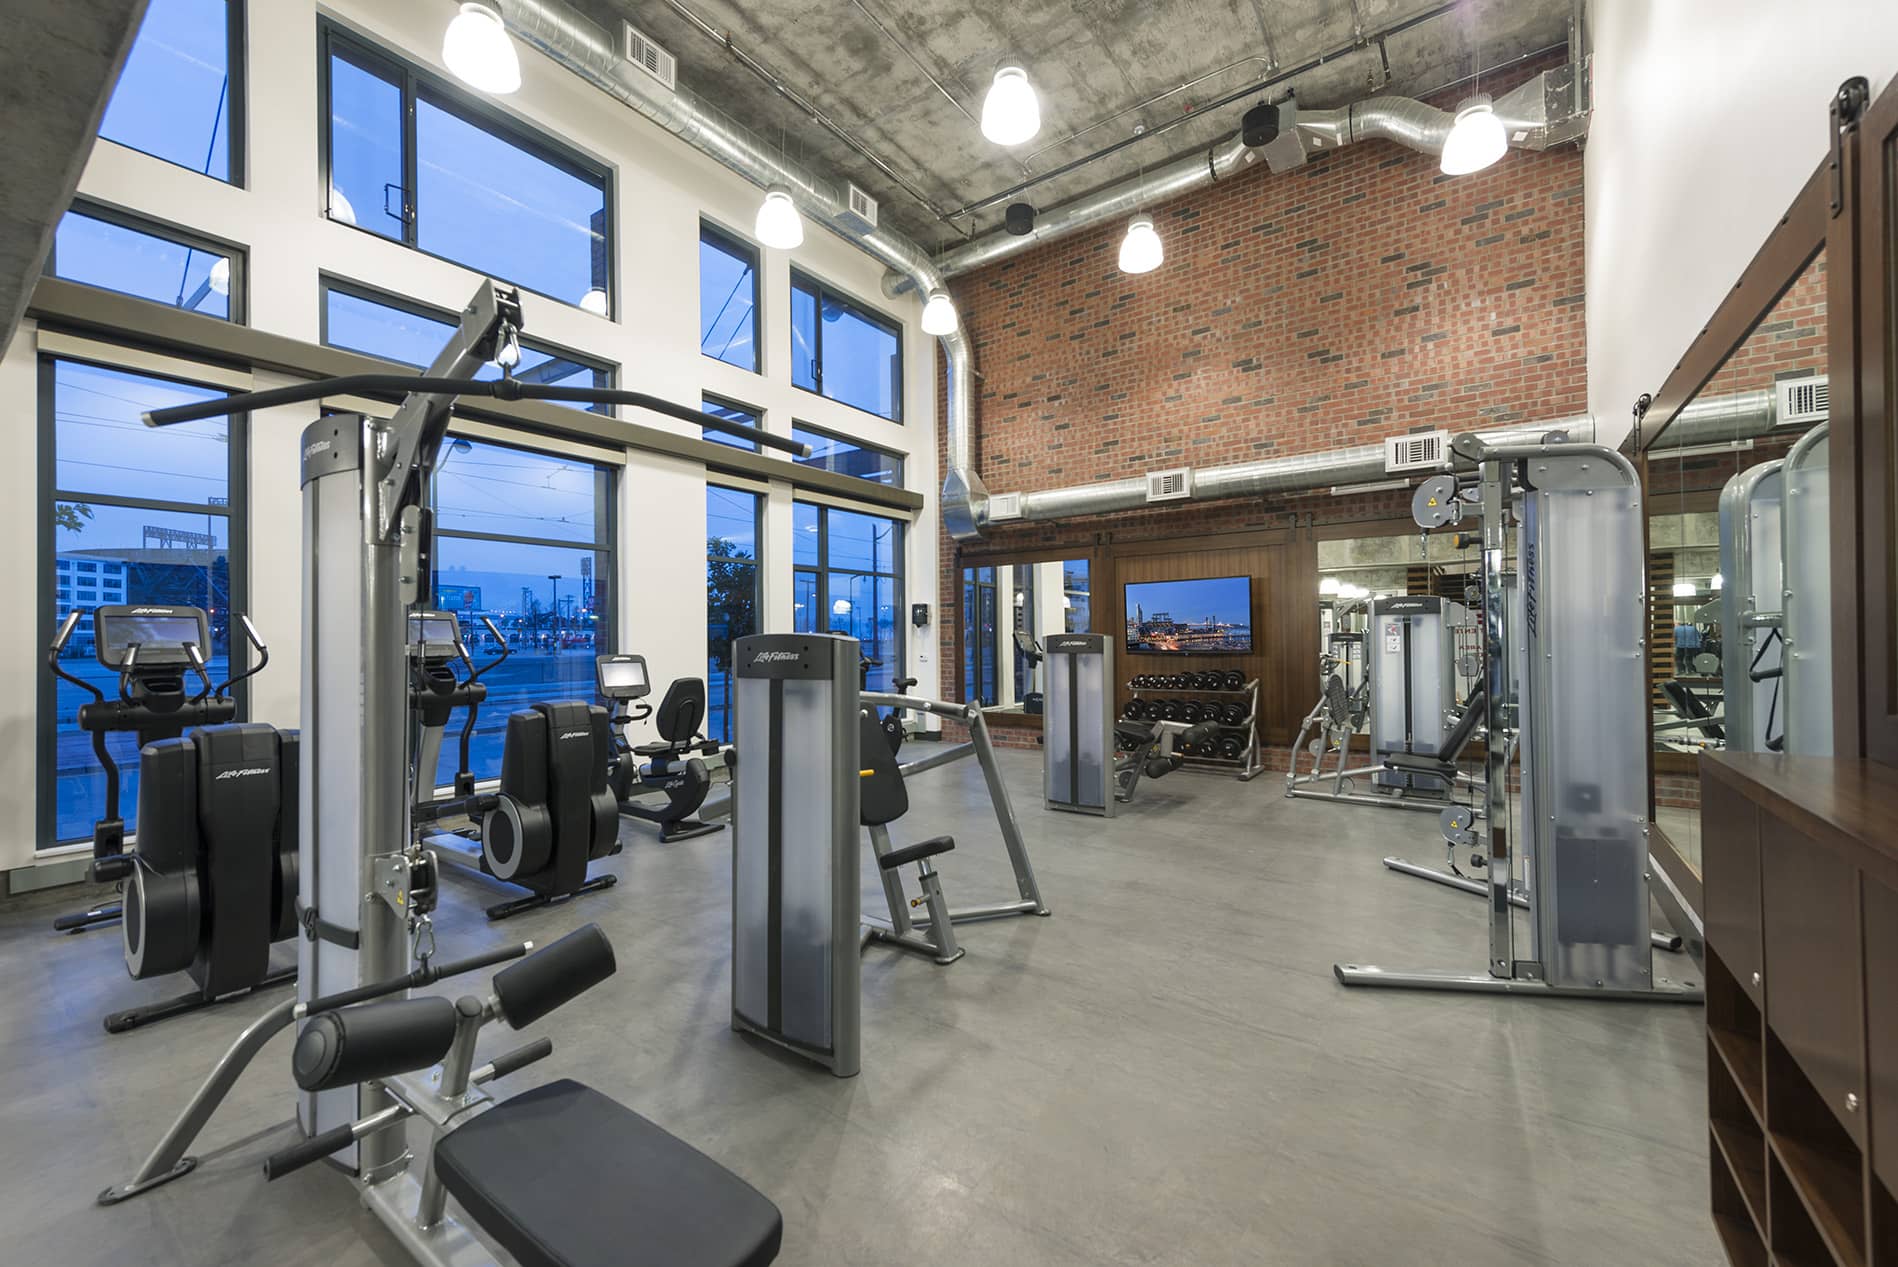 Channel Mission Bay Fitness Center